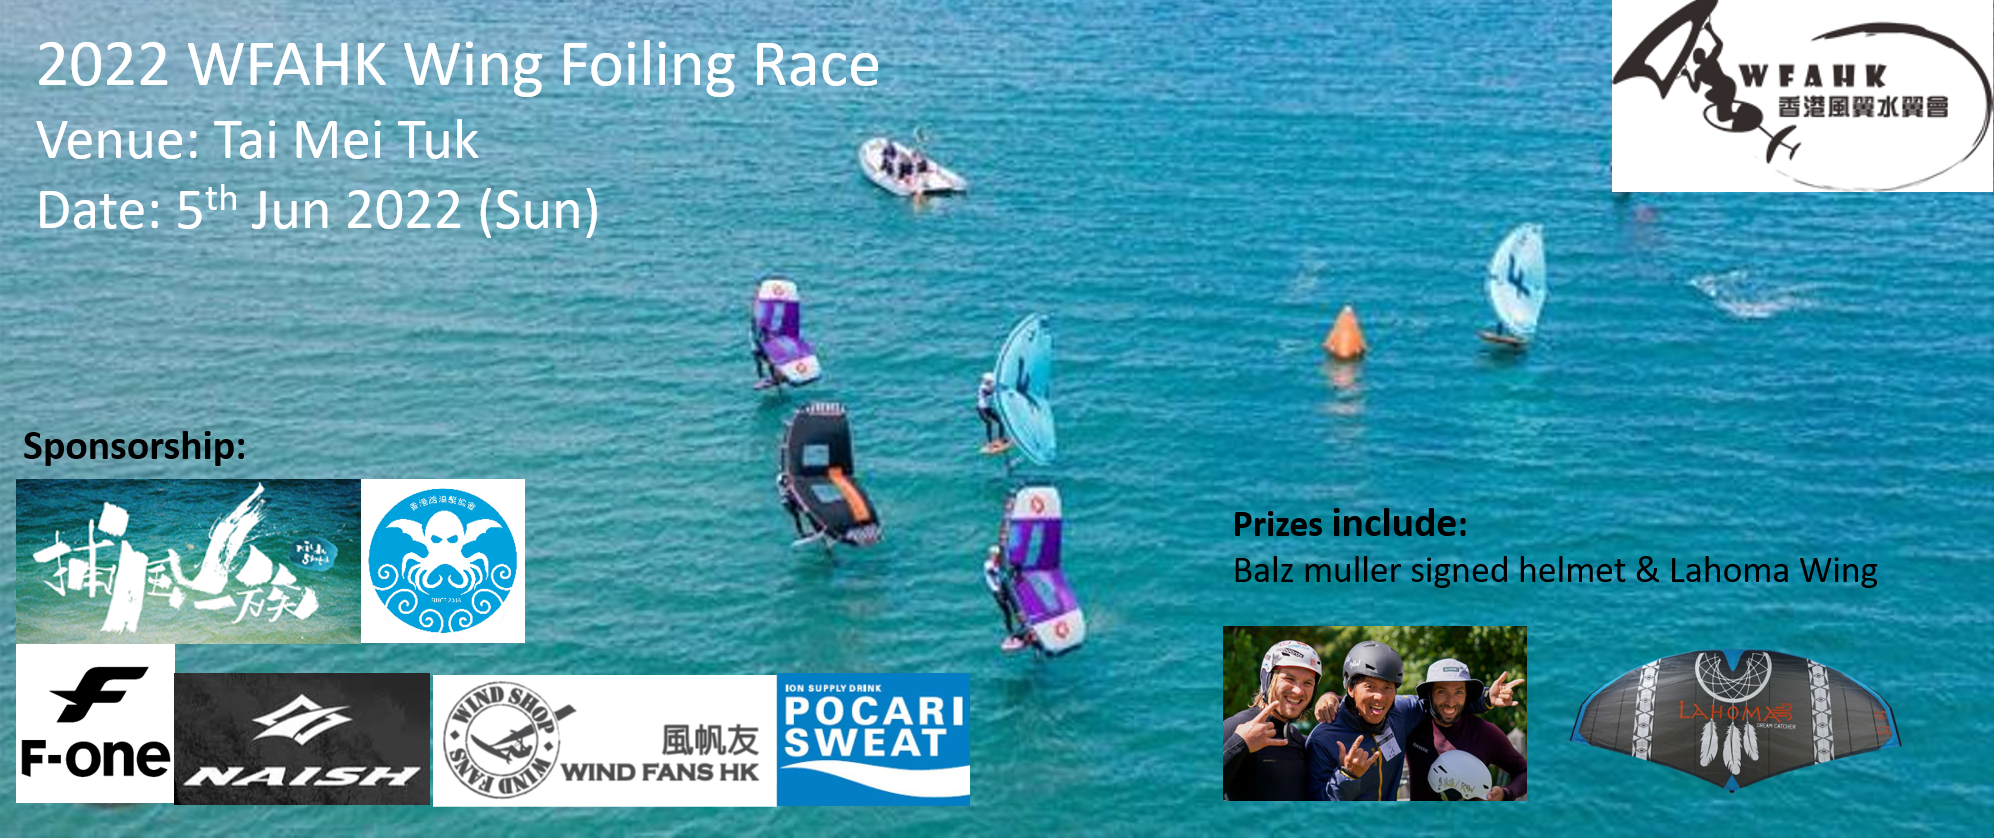 Image for Wing Foiling Race 202201